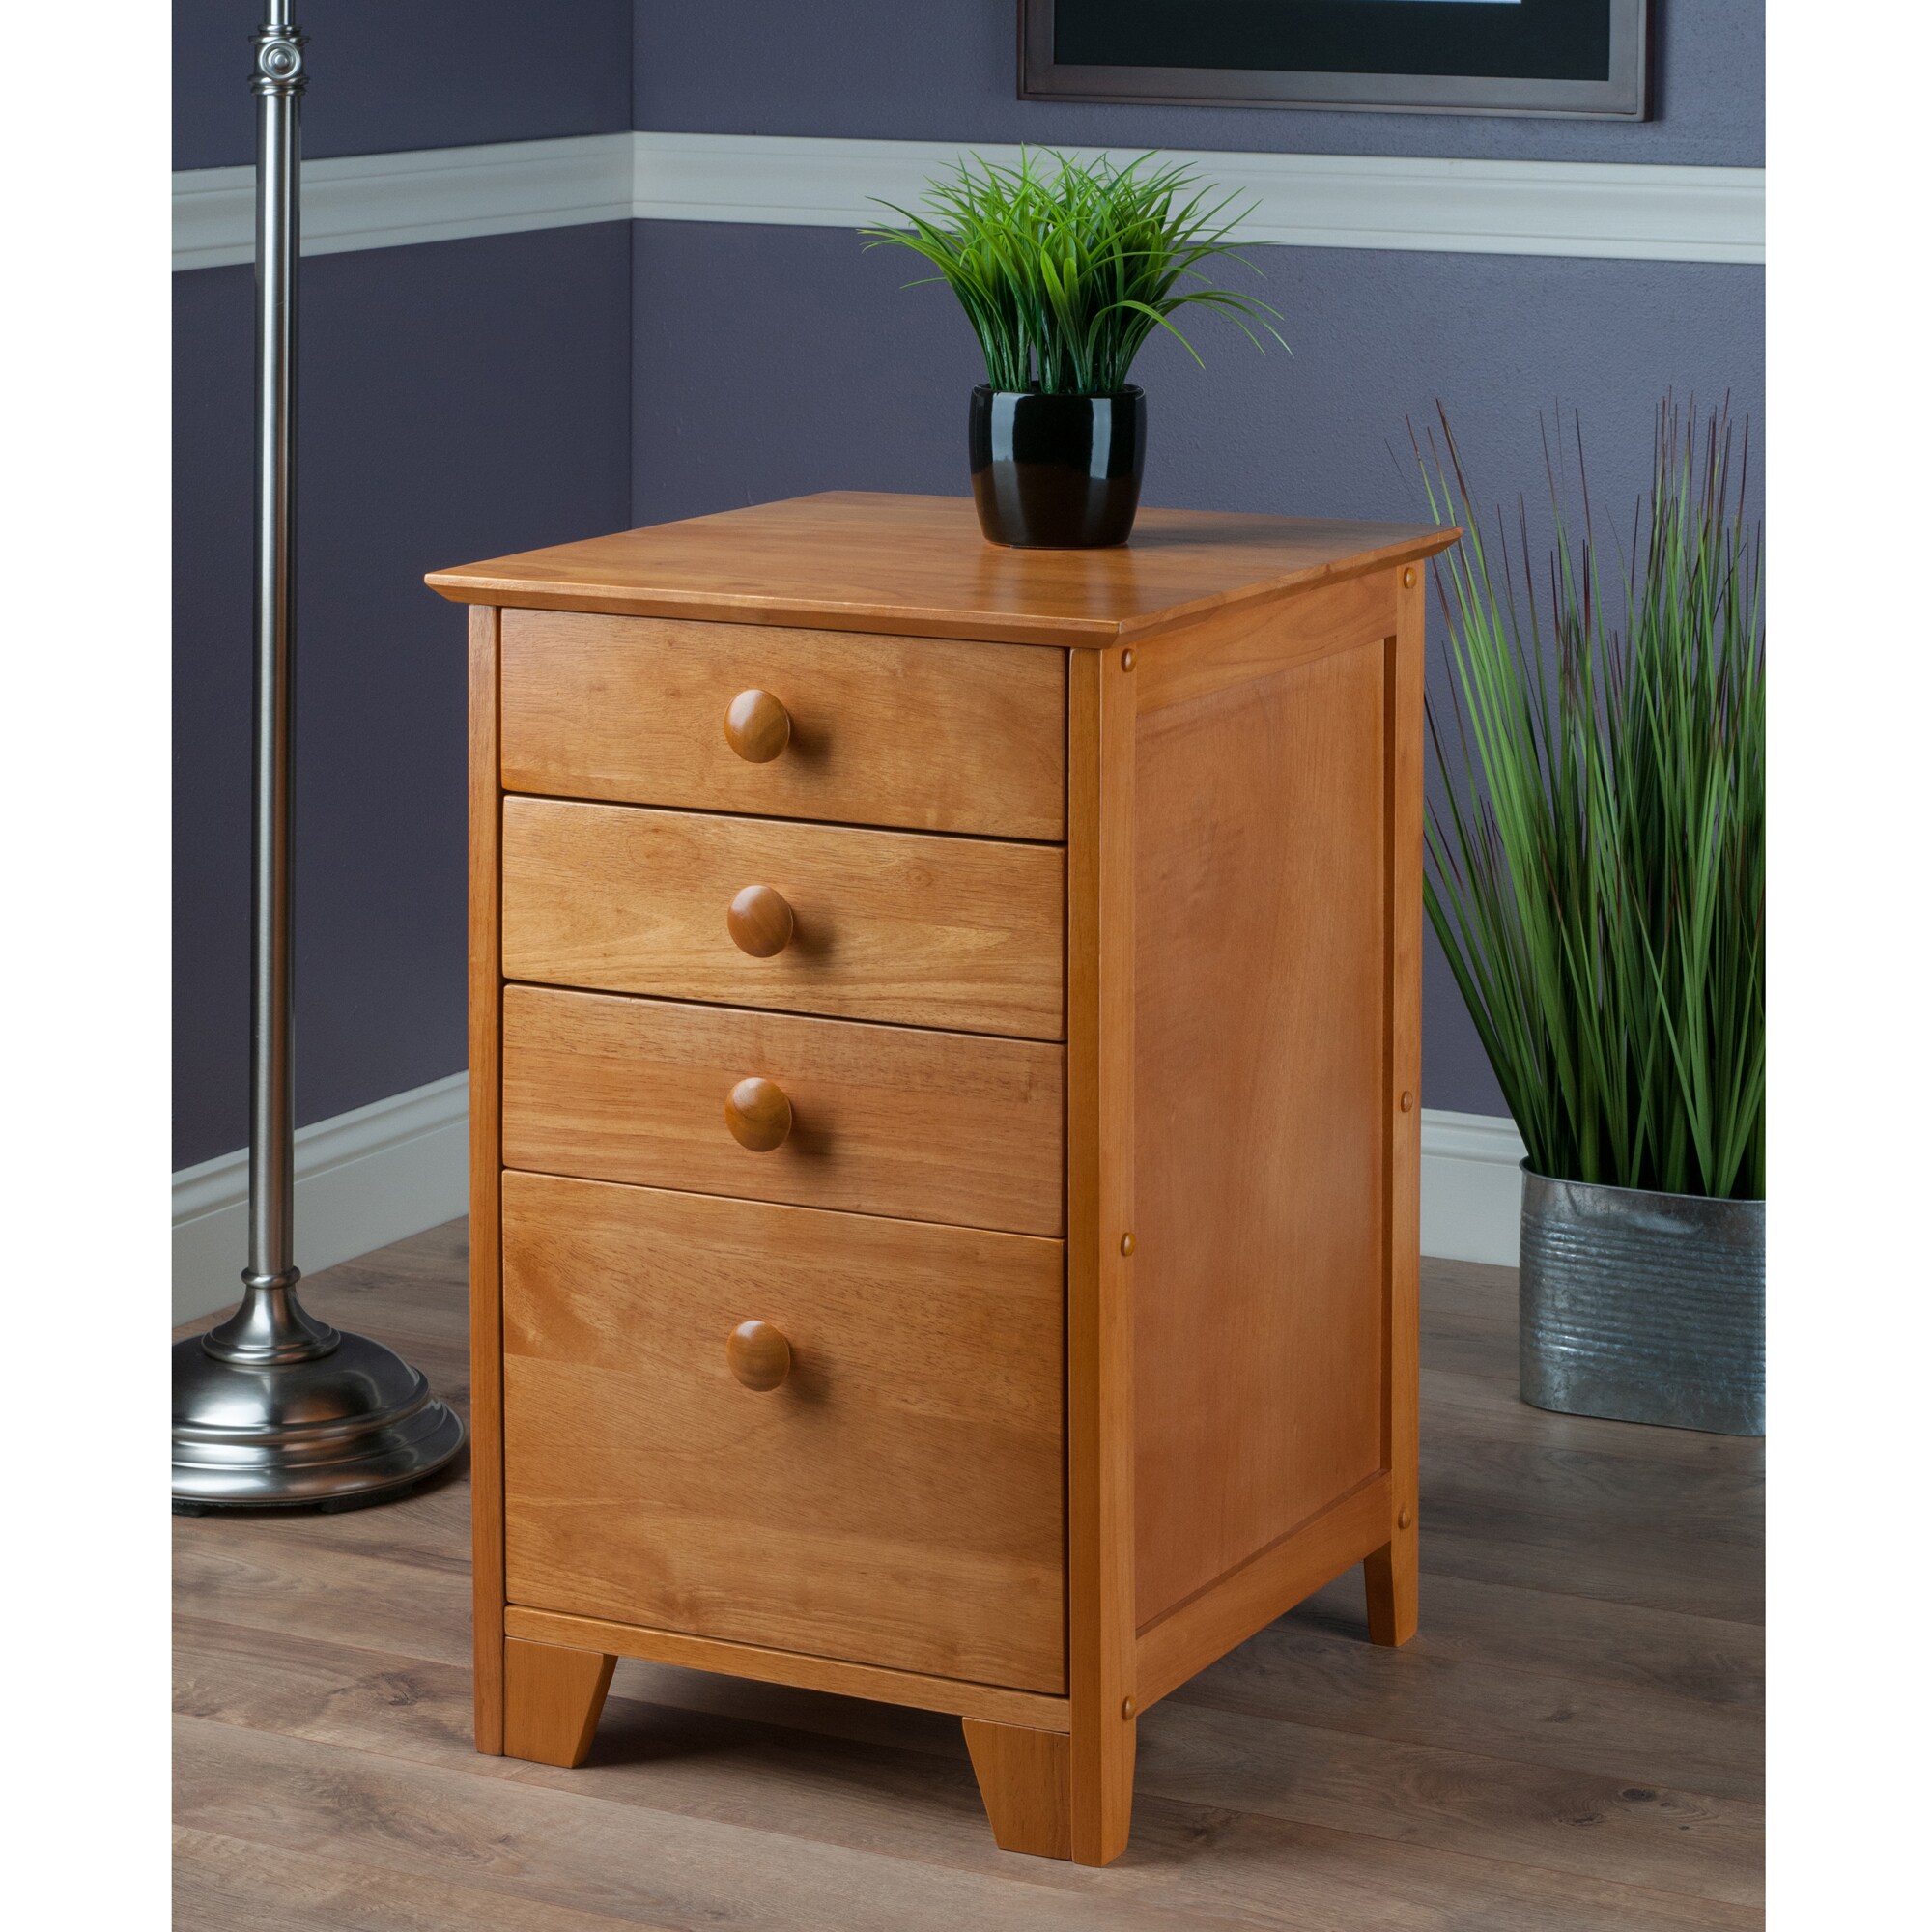 Winsome 4 Drawer Wood Vertical Filing Cabinet in Honey Pine